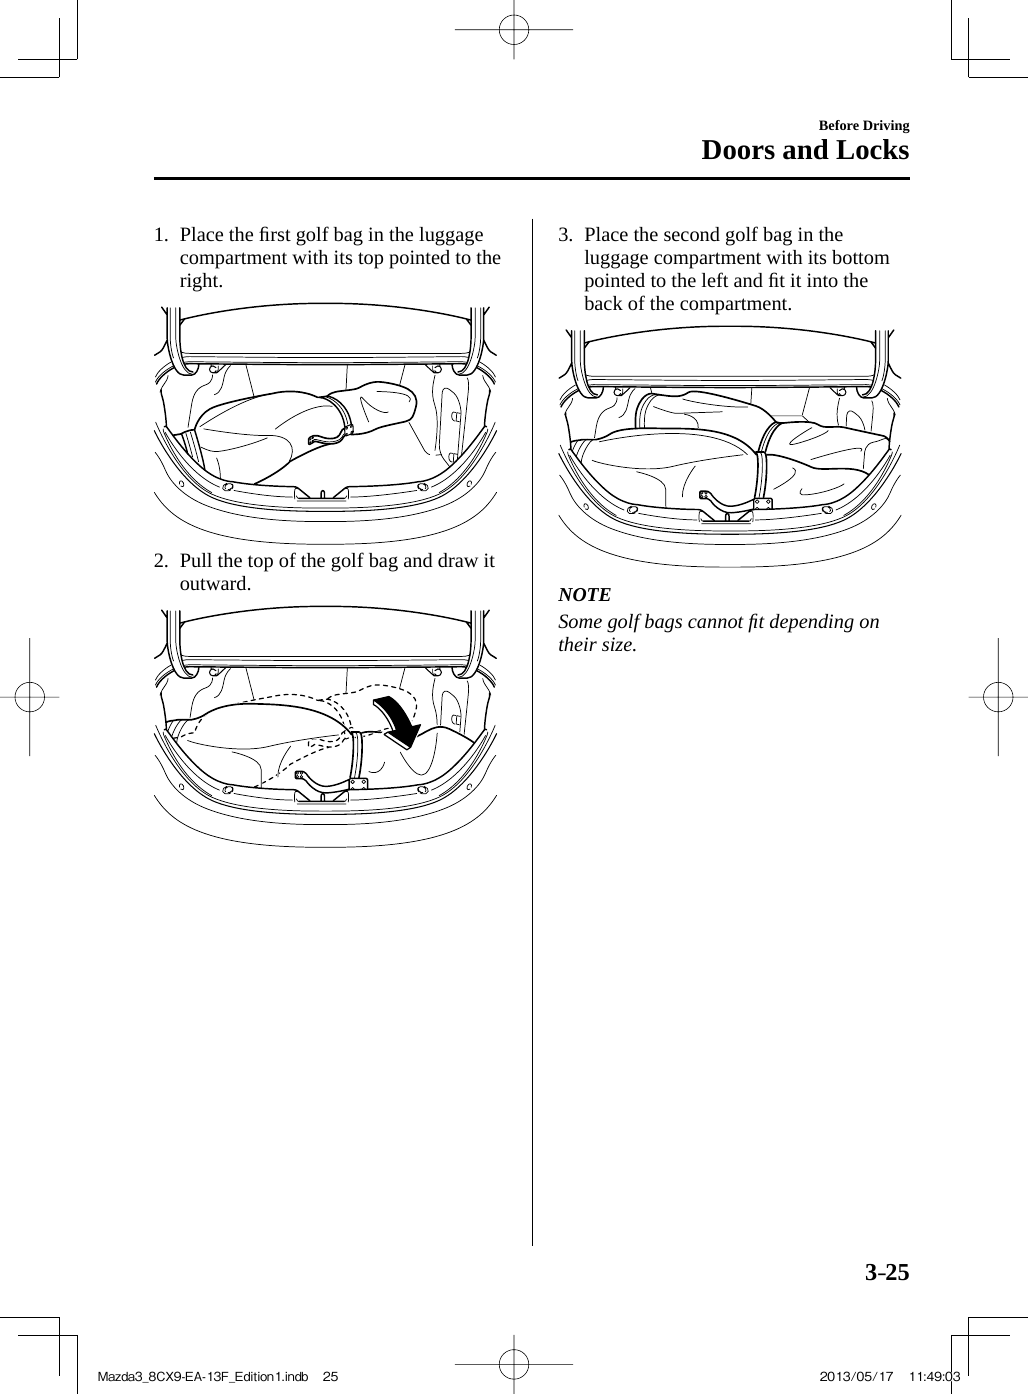 3–25Before DrivingDoors and Locks   1.   Place  the  ﬁ rst golf bag in the luggage compartment with its top pointed to the right.        2.   Pull the top of the golf bag and draw it outward.        3.   Place the second golf bag in the luggage compartment with its bottom pointed to the left and ﬁ t it into the back of the compartment.          NOTE  Some golf bags cannot ﬁ t depending on their size.   Mazda3_8CX9-EA-13F_Edition1.indb   25Mazda3_8CX9-EA-13F_Edition1.indb   25 2013/05/17   11:49:032013/05/17   11:49:03